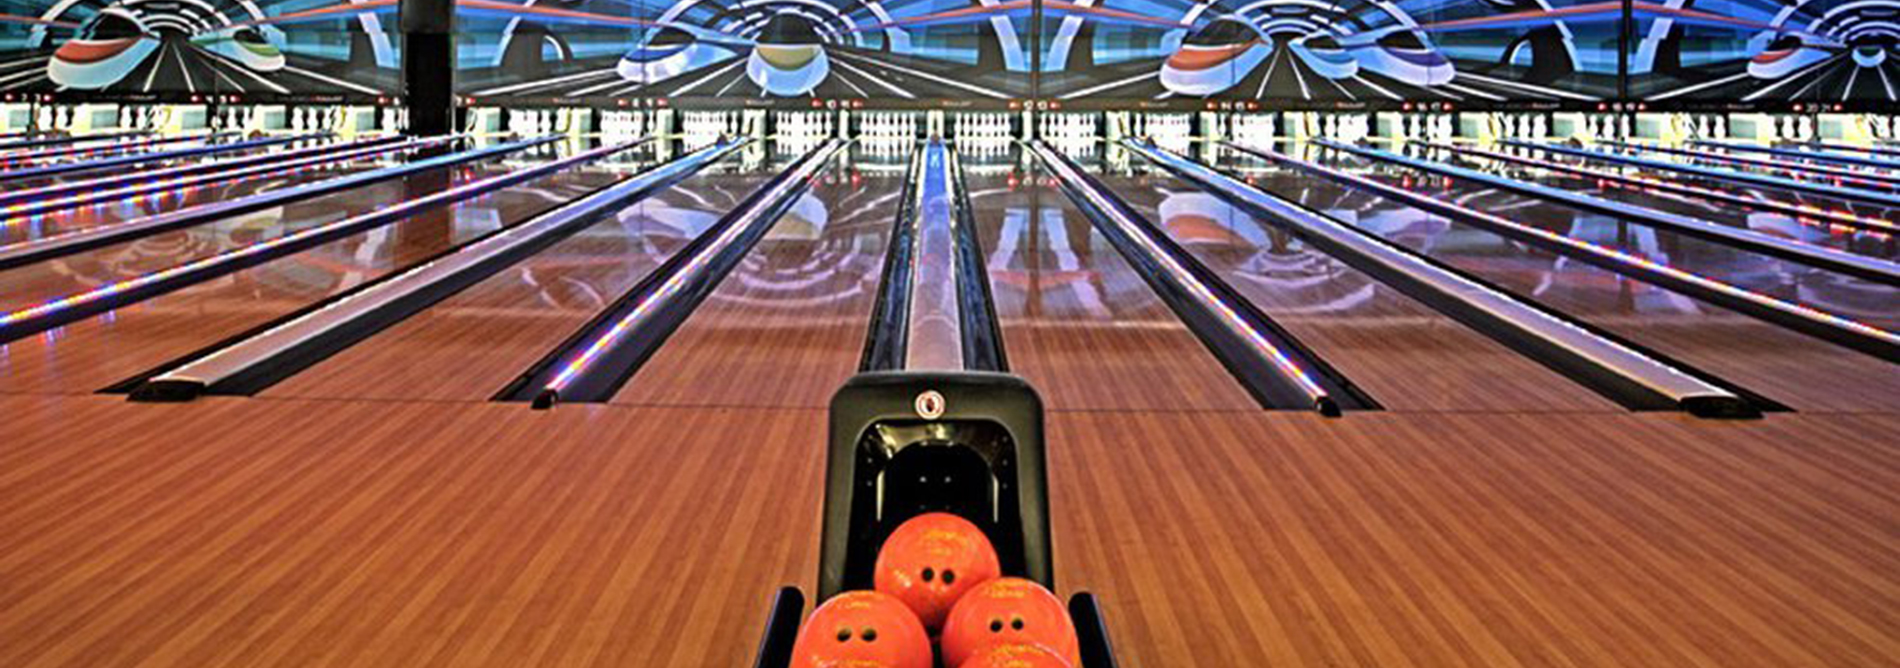 QUBICAAMF-bowling-Family-Entertainment-Center-Station-300-banner.jpg